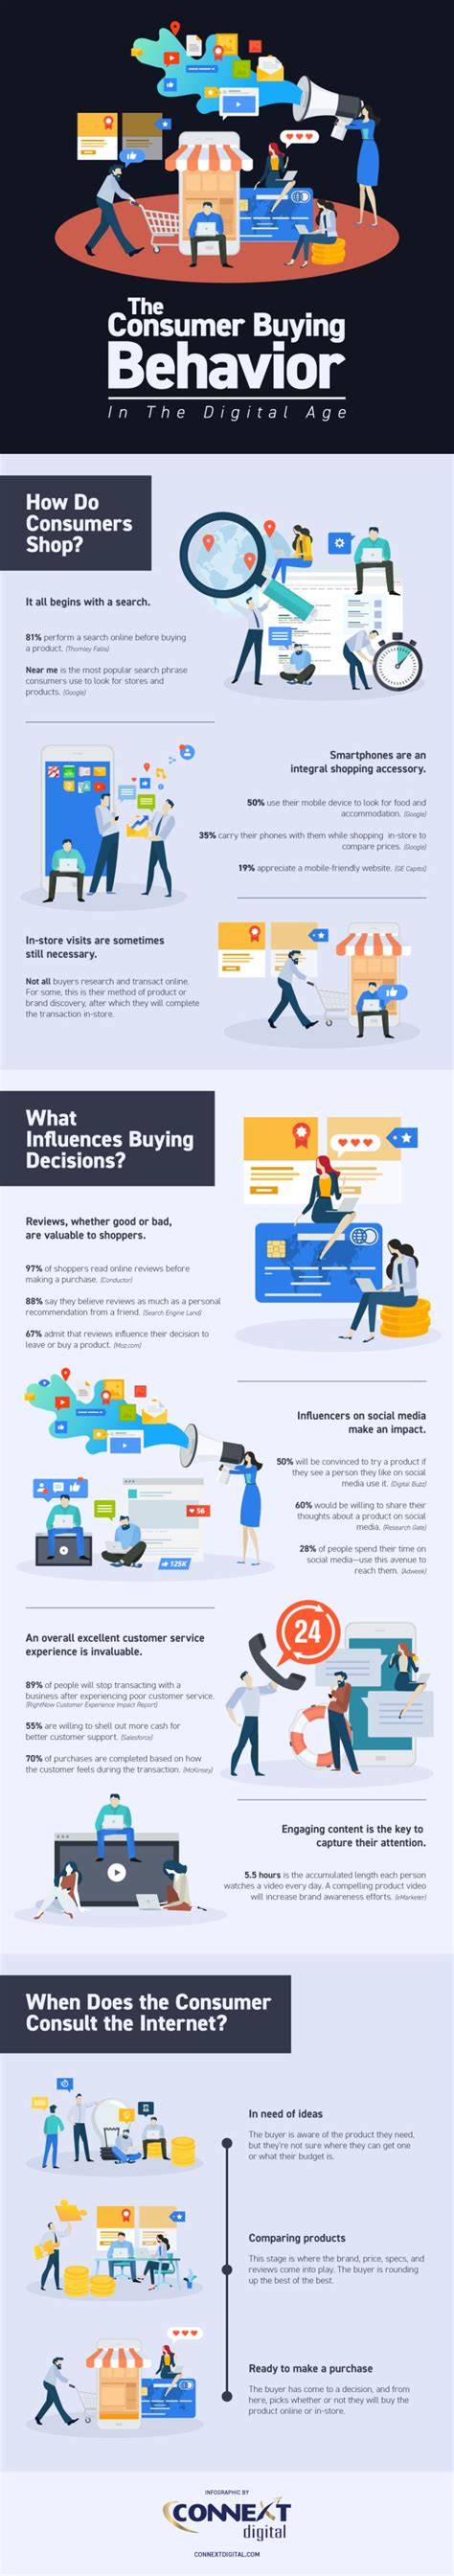 The Consumer Buying Behavior In The Digital Age Infographic Digital